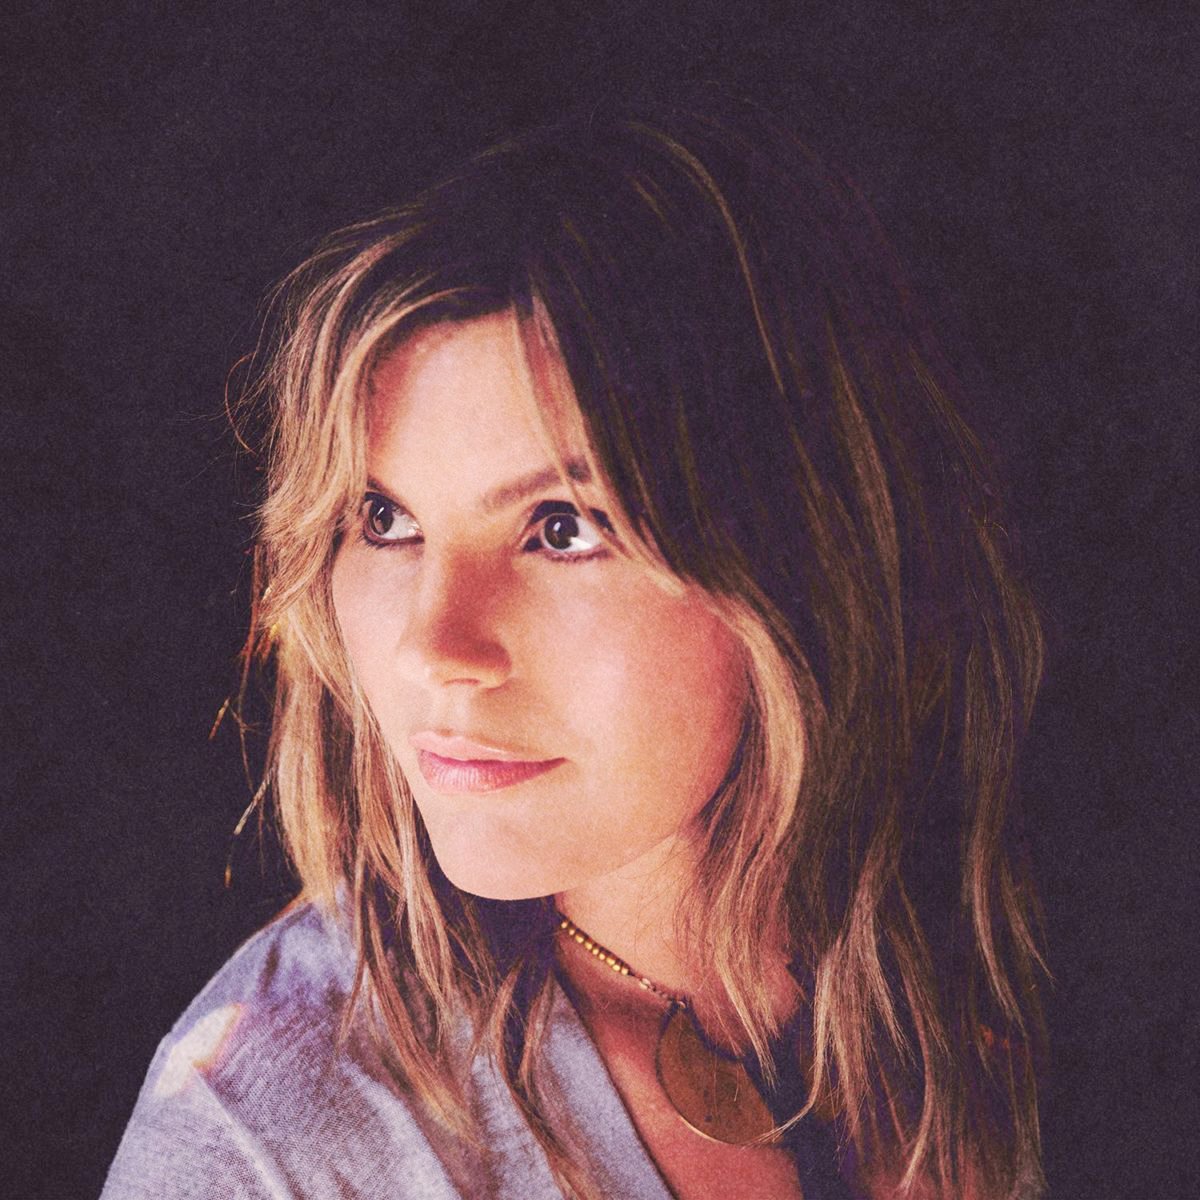 Grace Potter takes the stage on Saturday, Sept. 3